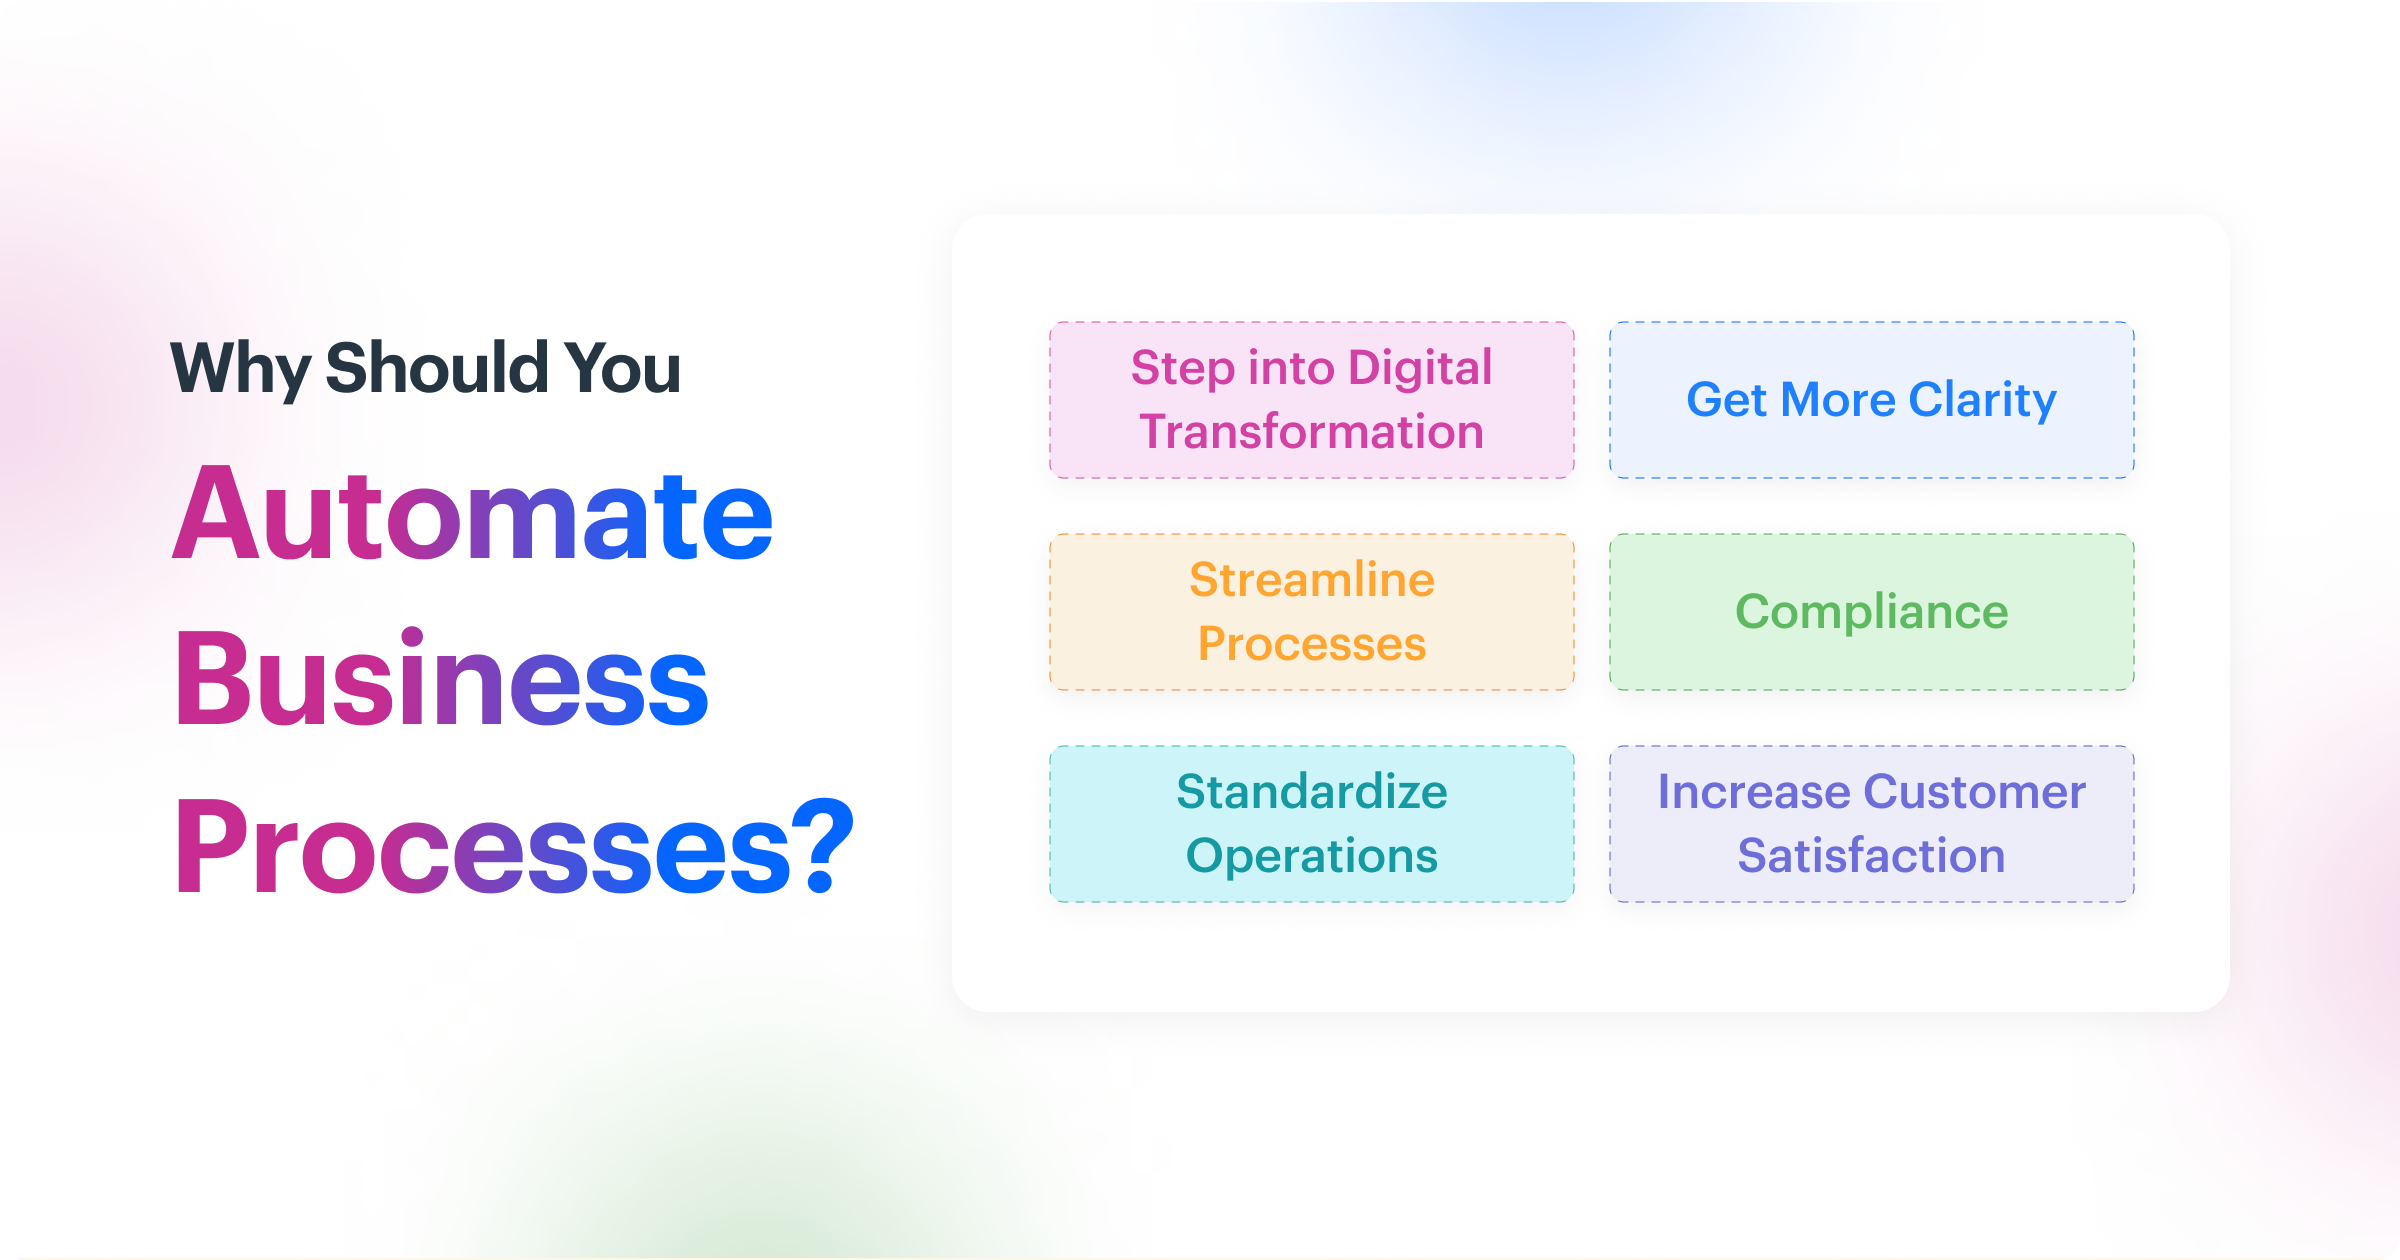 Automate Business Processes